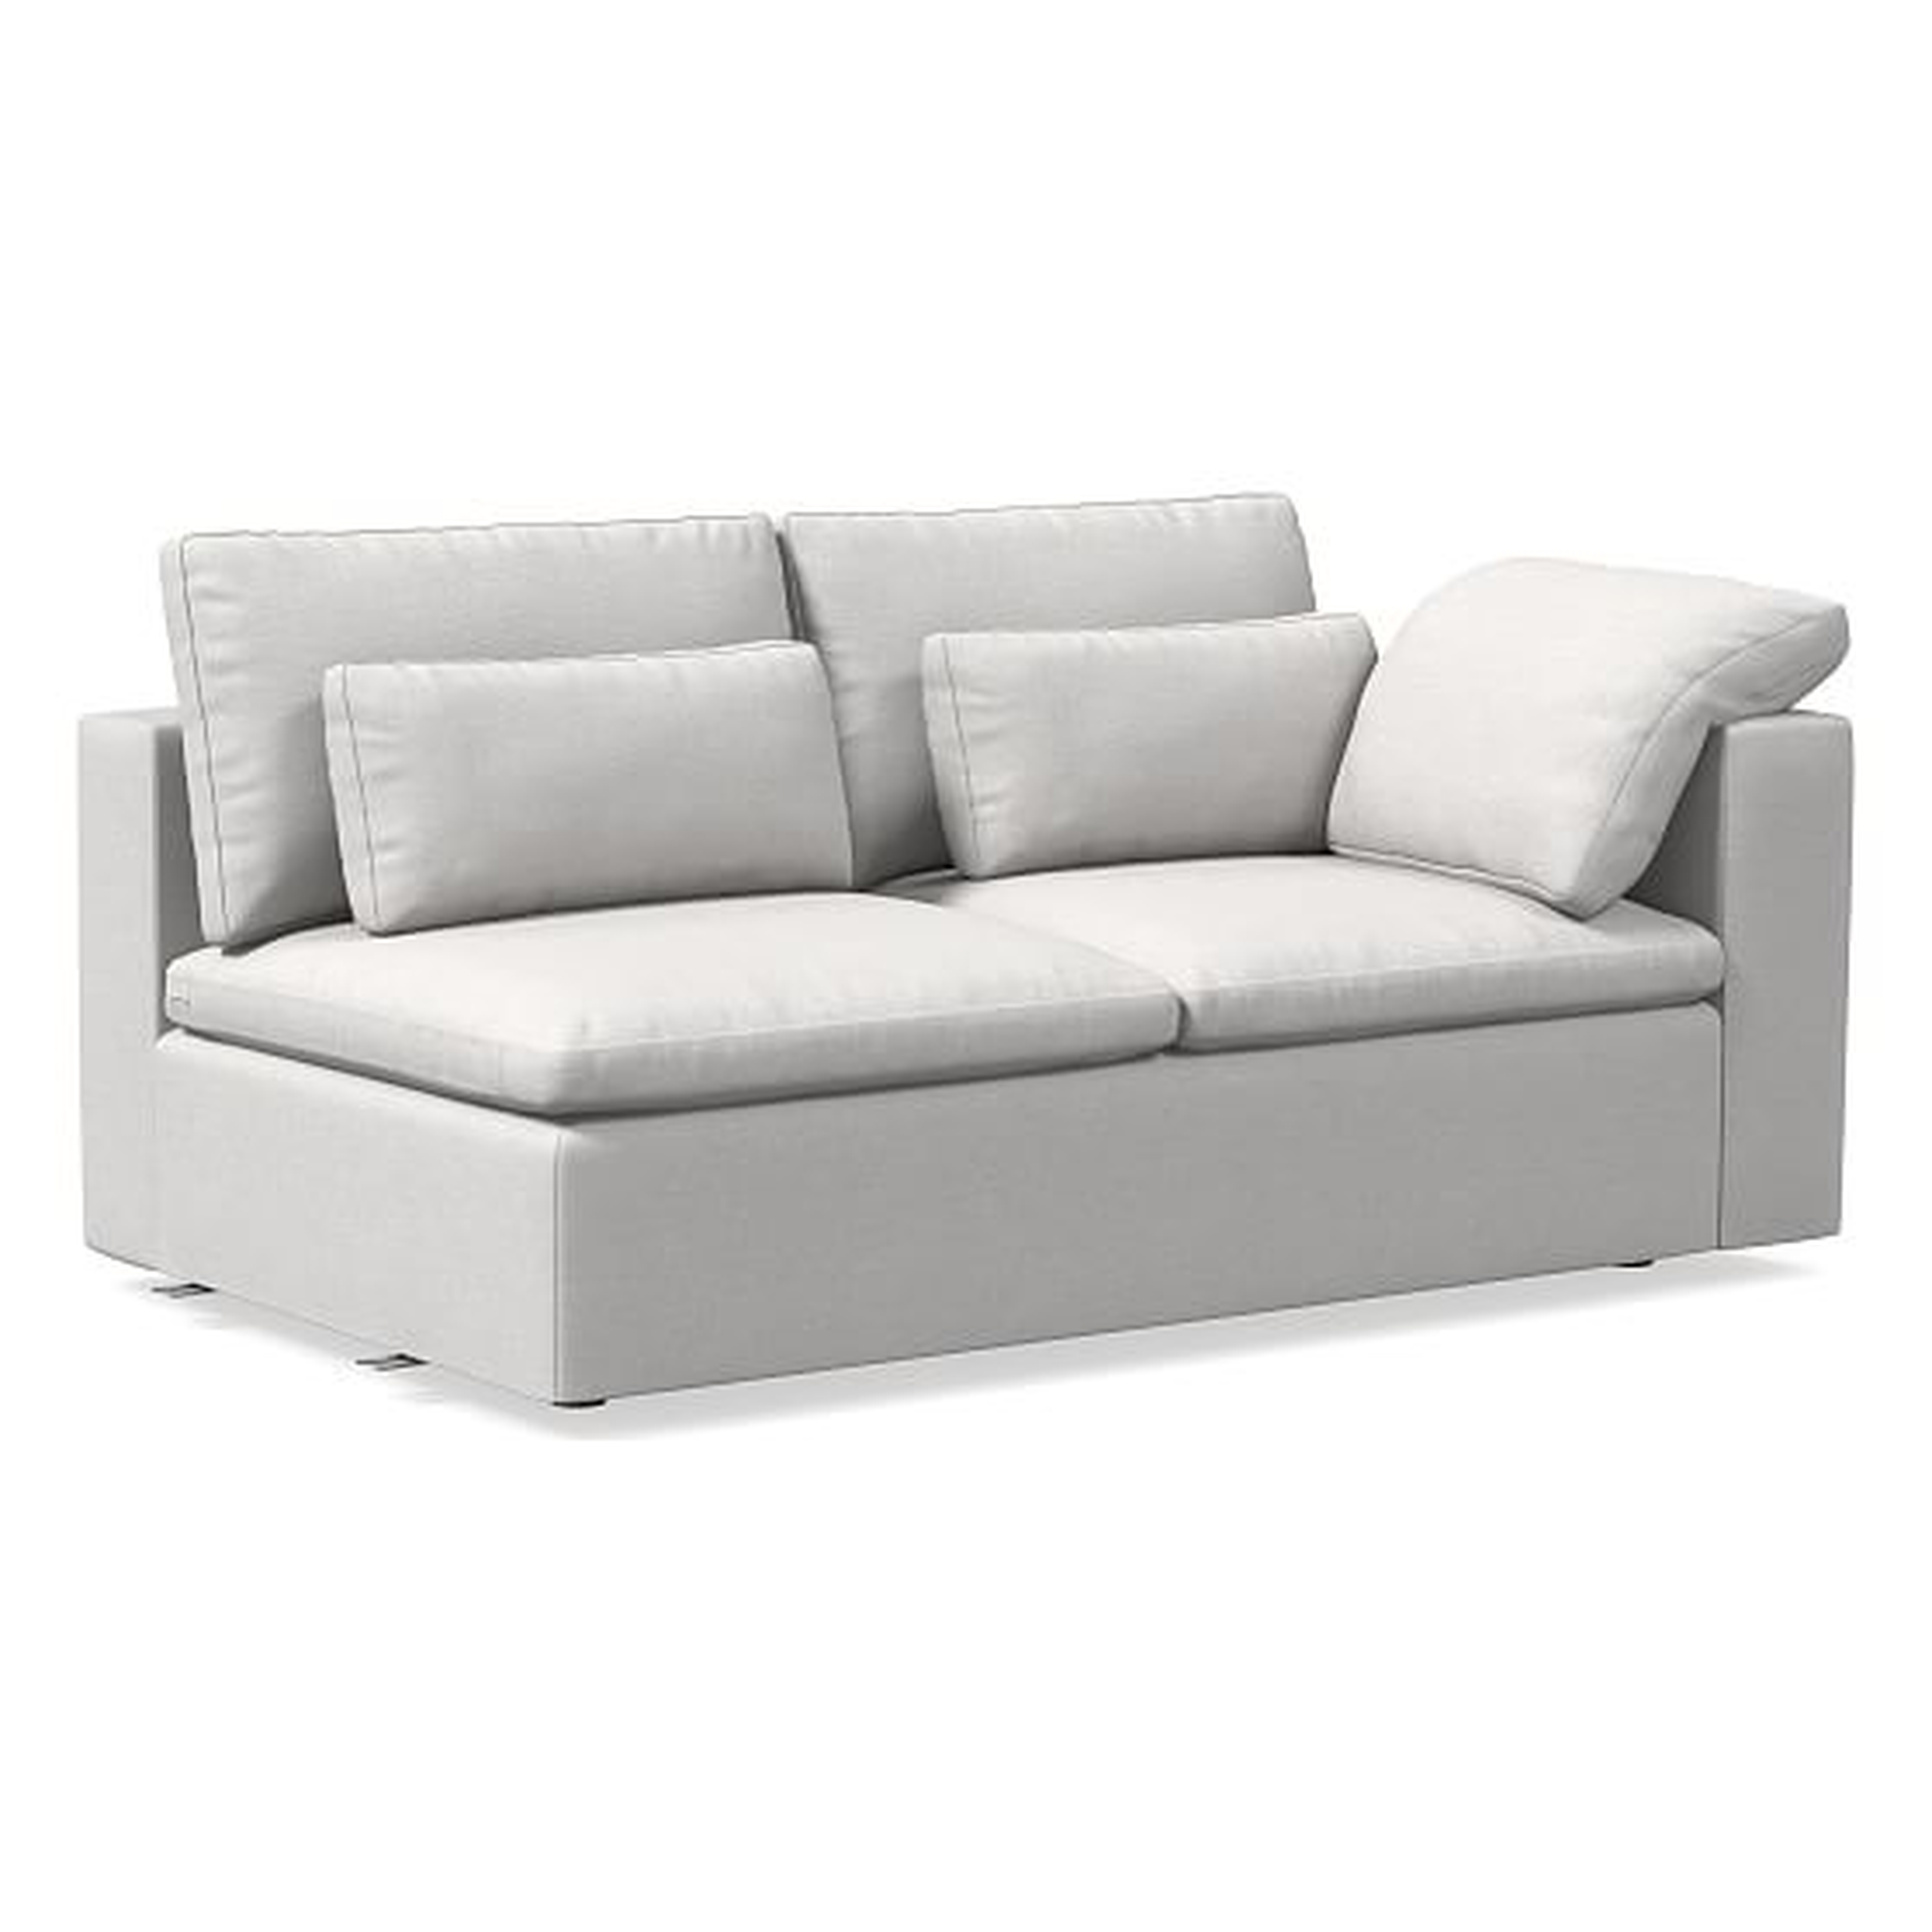 Harmony Modular Right Arm Sofa, Down, Eco Weave, Oyster, Concealed Supports - West Elm